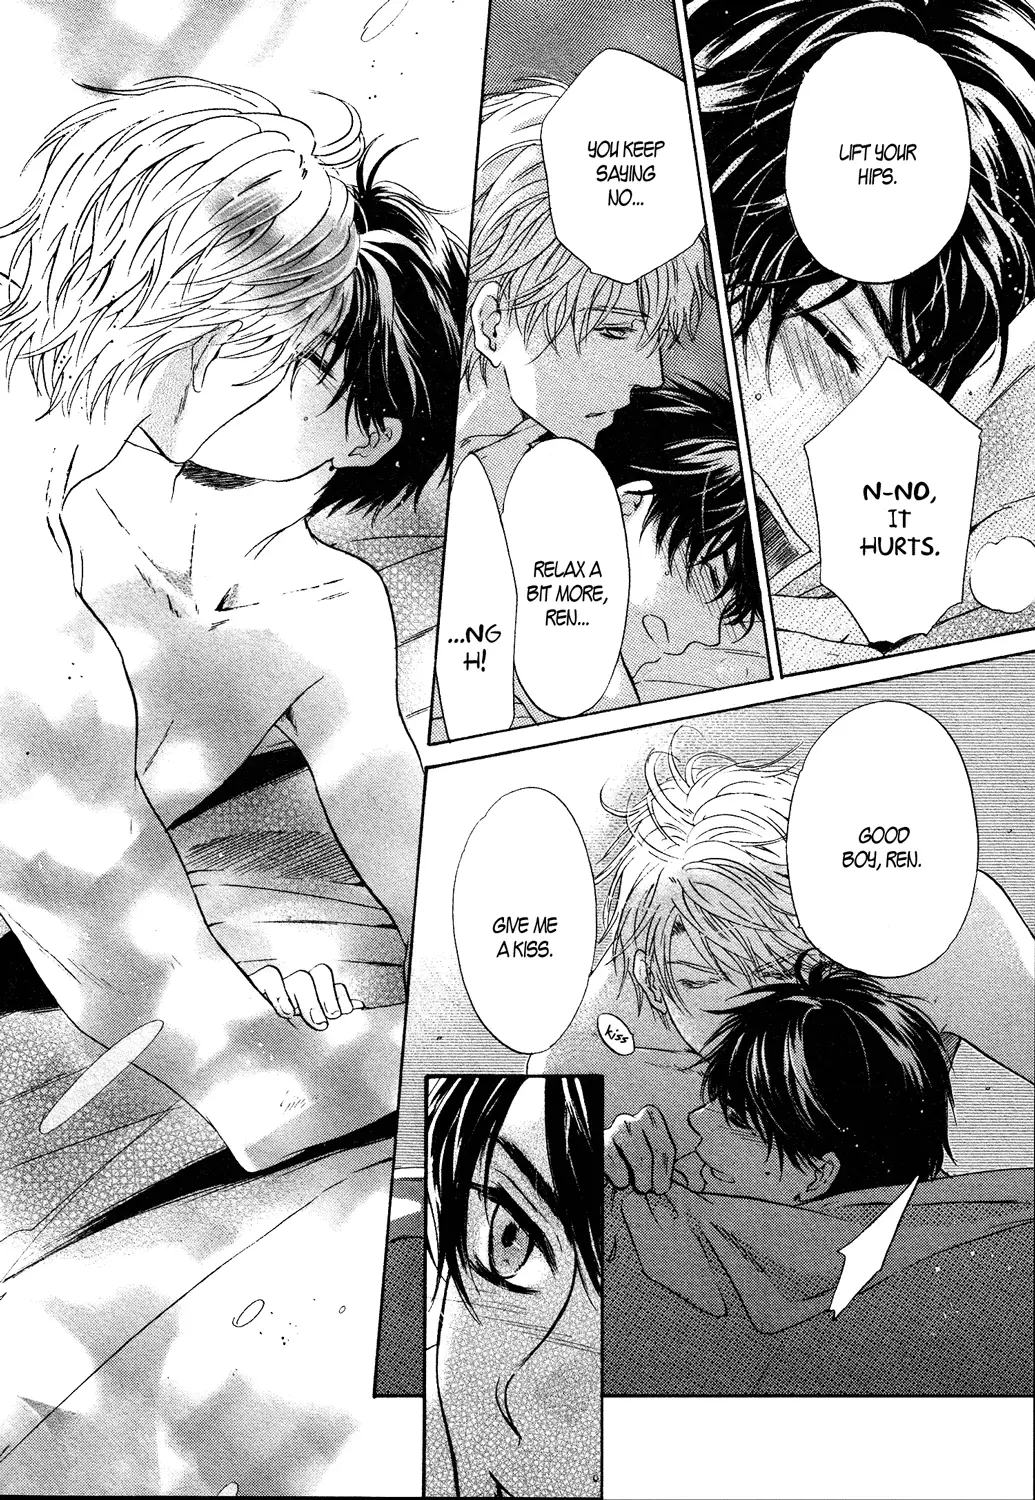 Super Lovers - 32 page 50-85ad6ae6